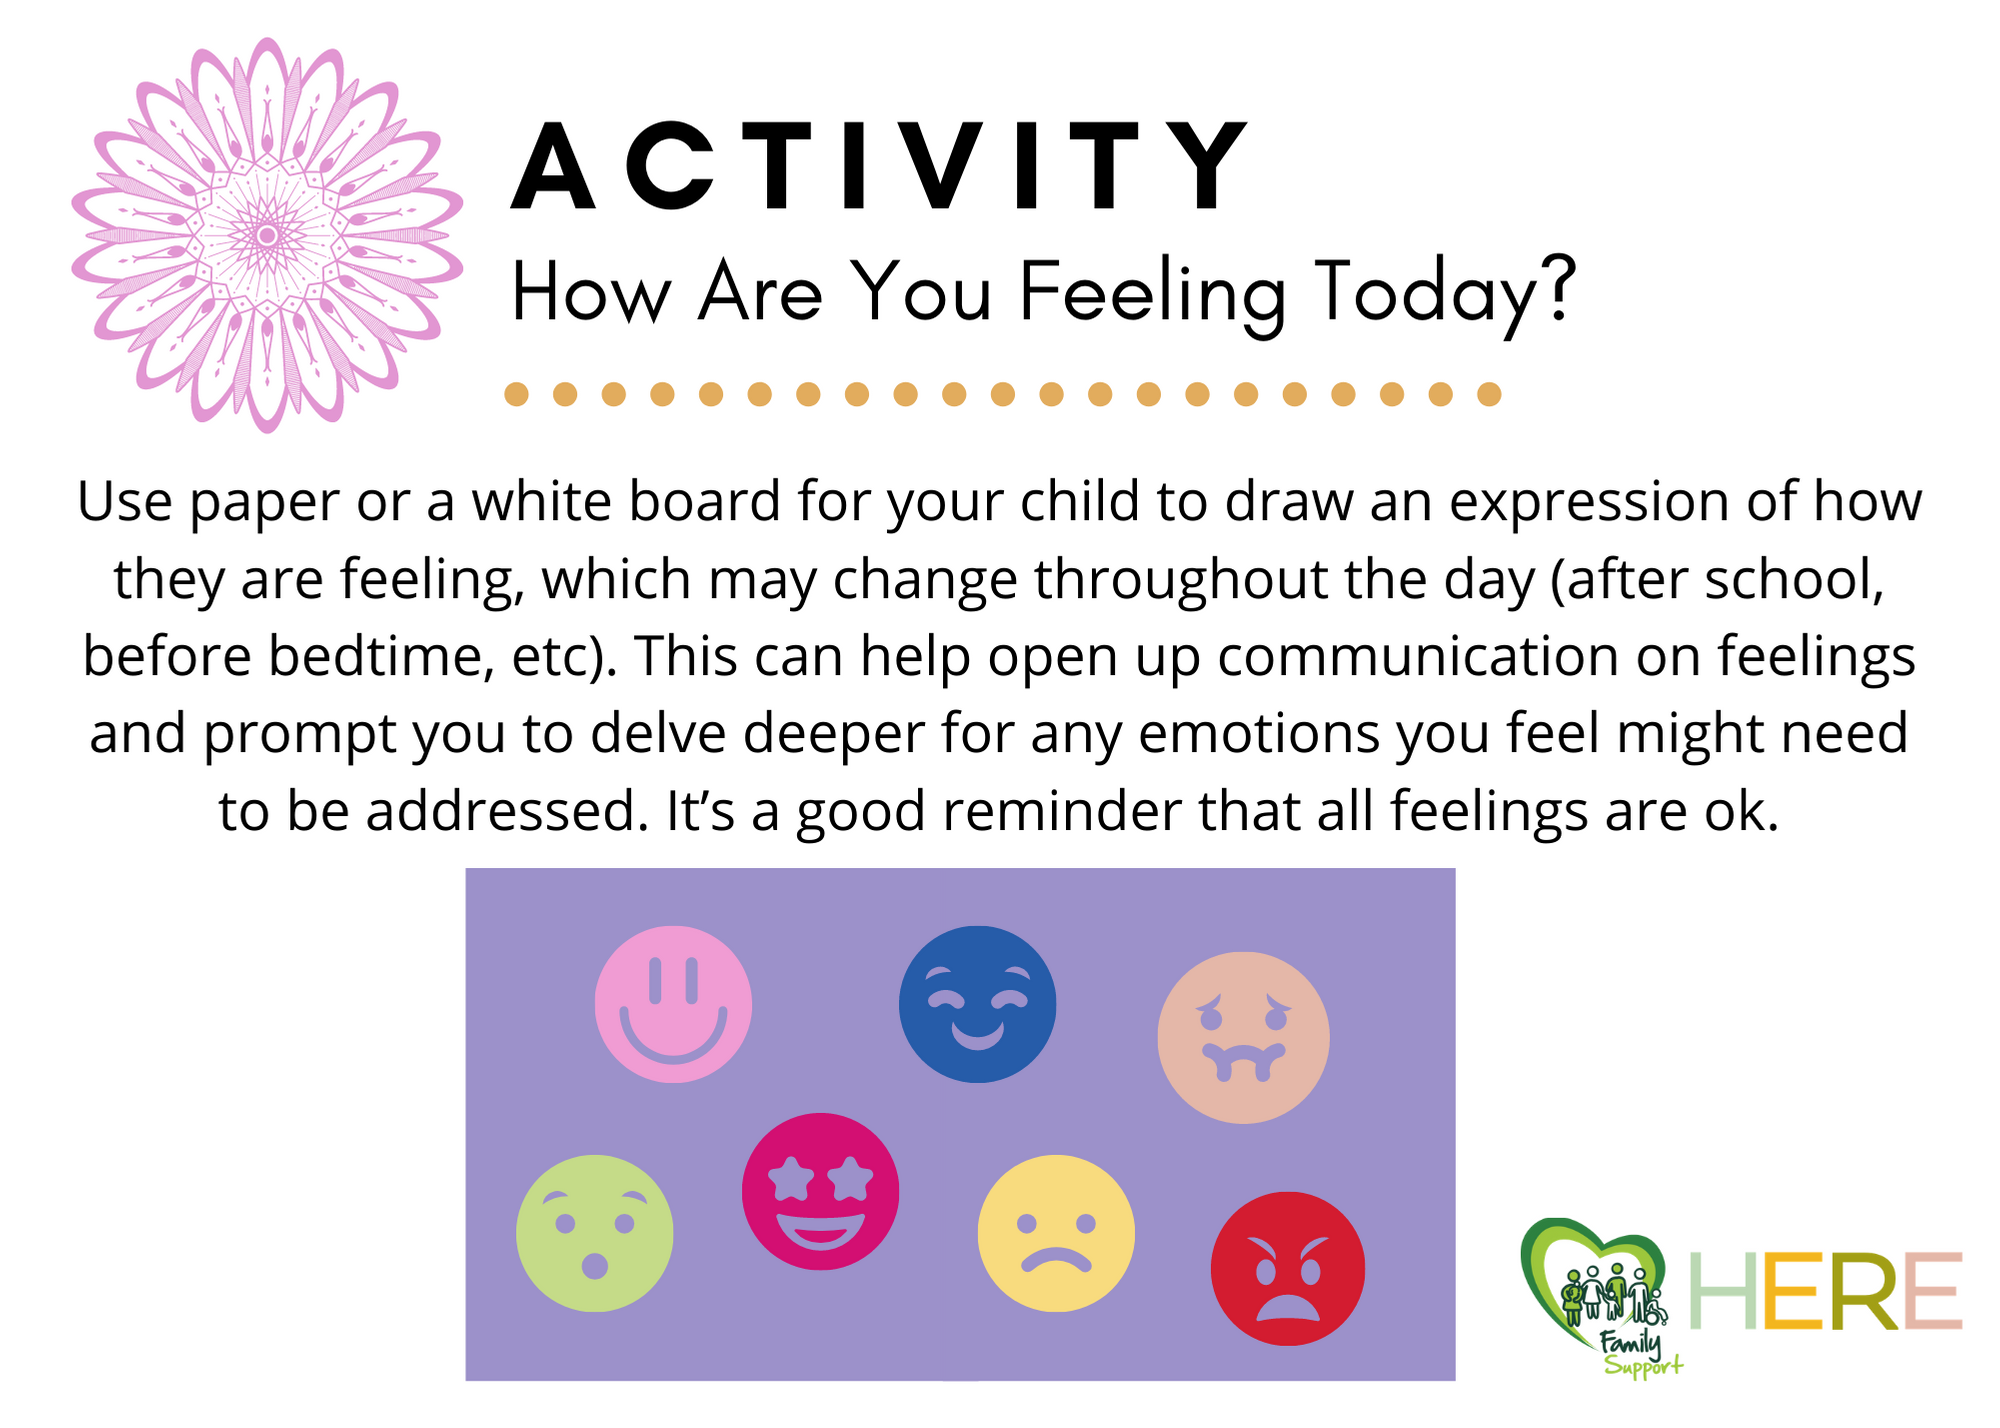 Activity How Are You Feeling Today.png